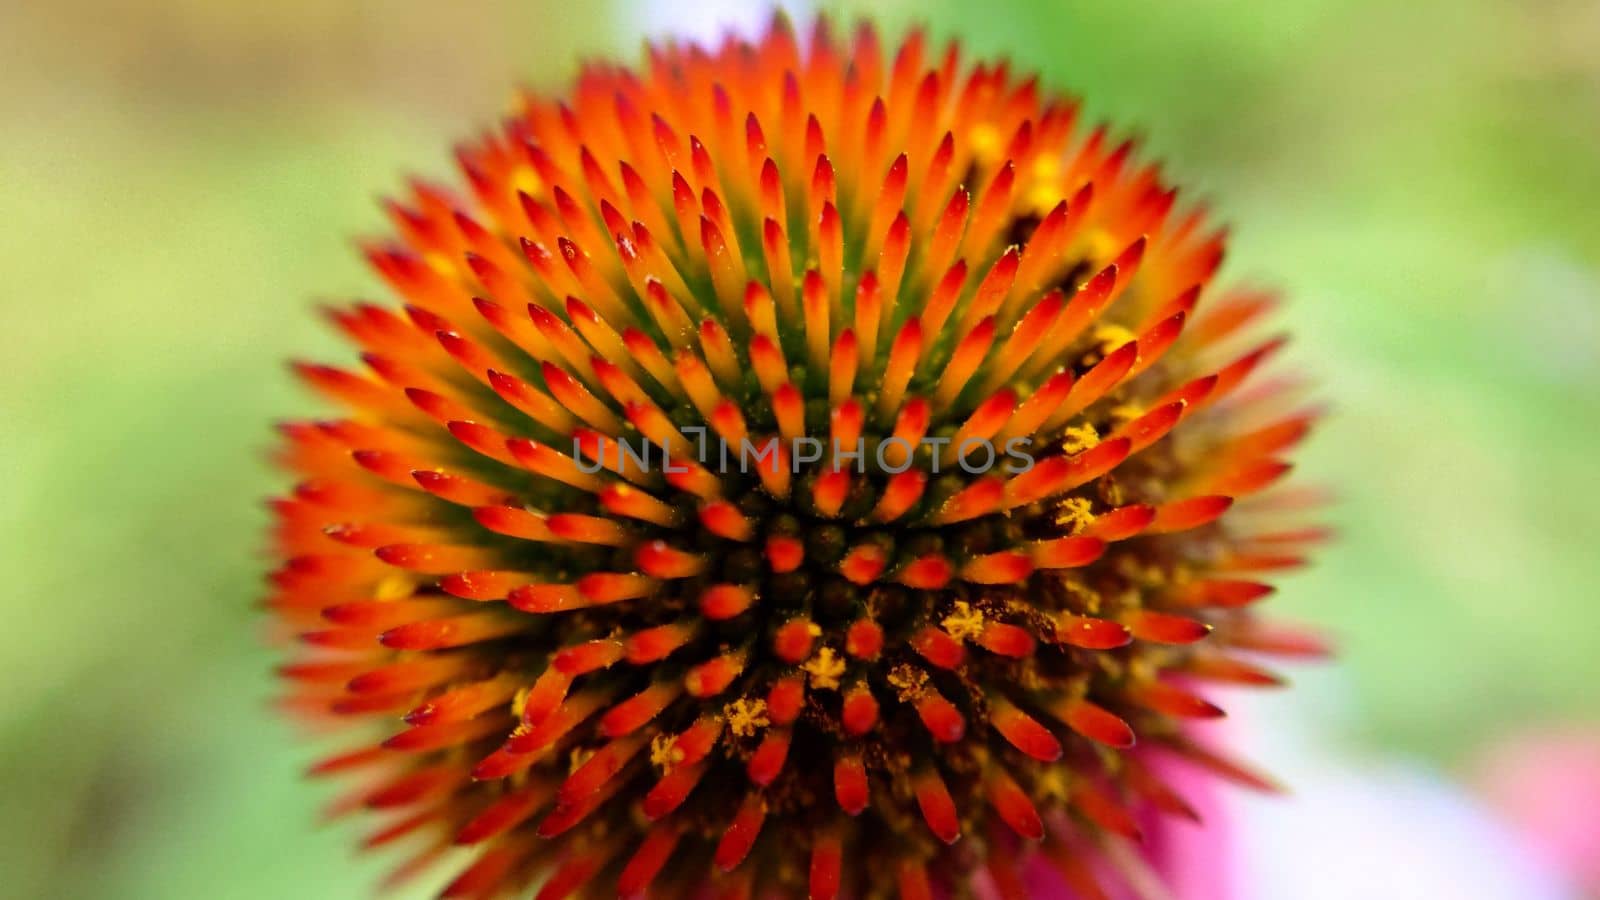 Single pink Echinacea flower with a prickly head close-up by Mastak80